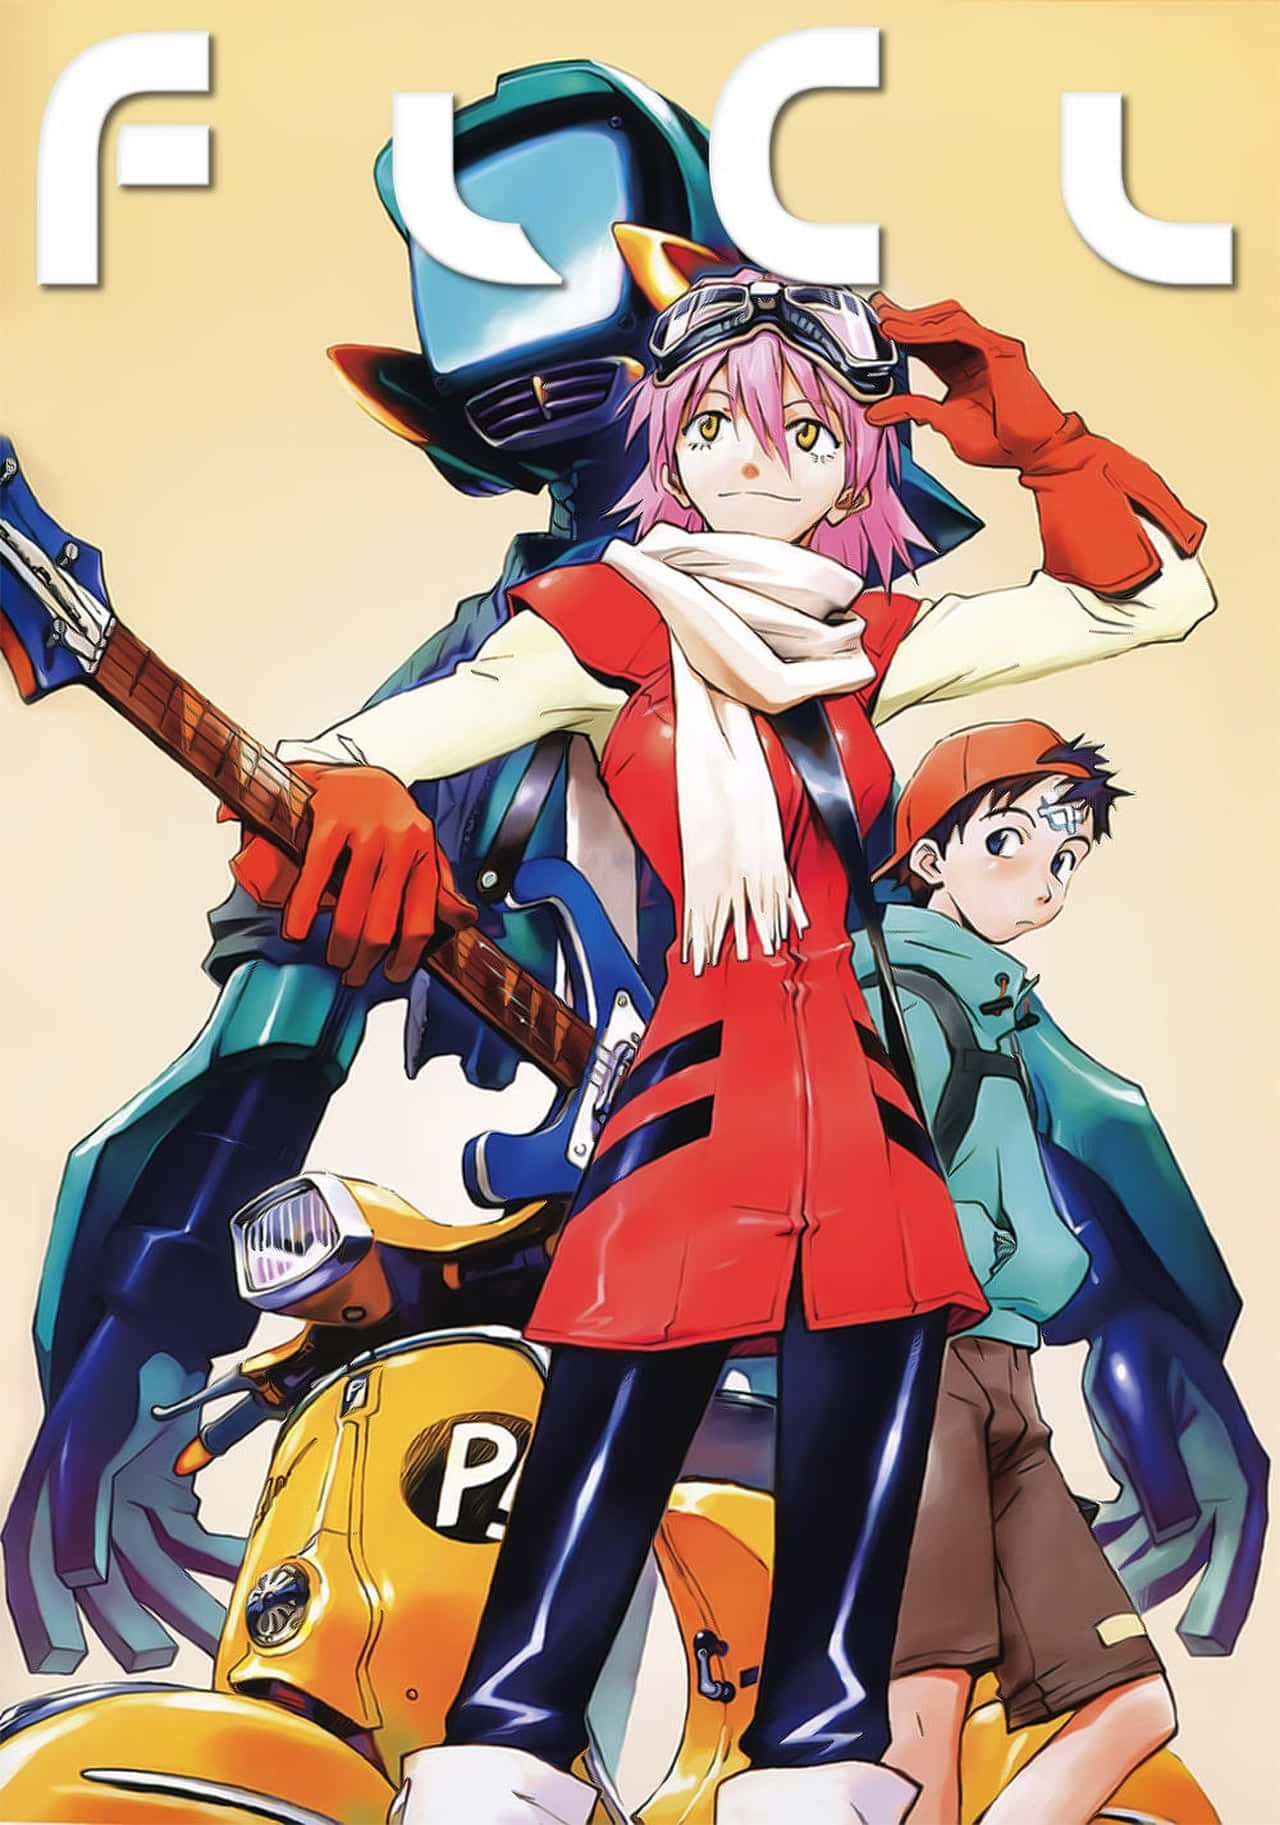 Caption: Main Characters of FLCL Alternative Animation Series Wallpaper